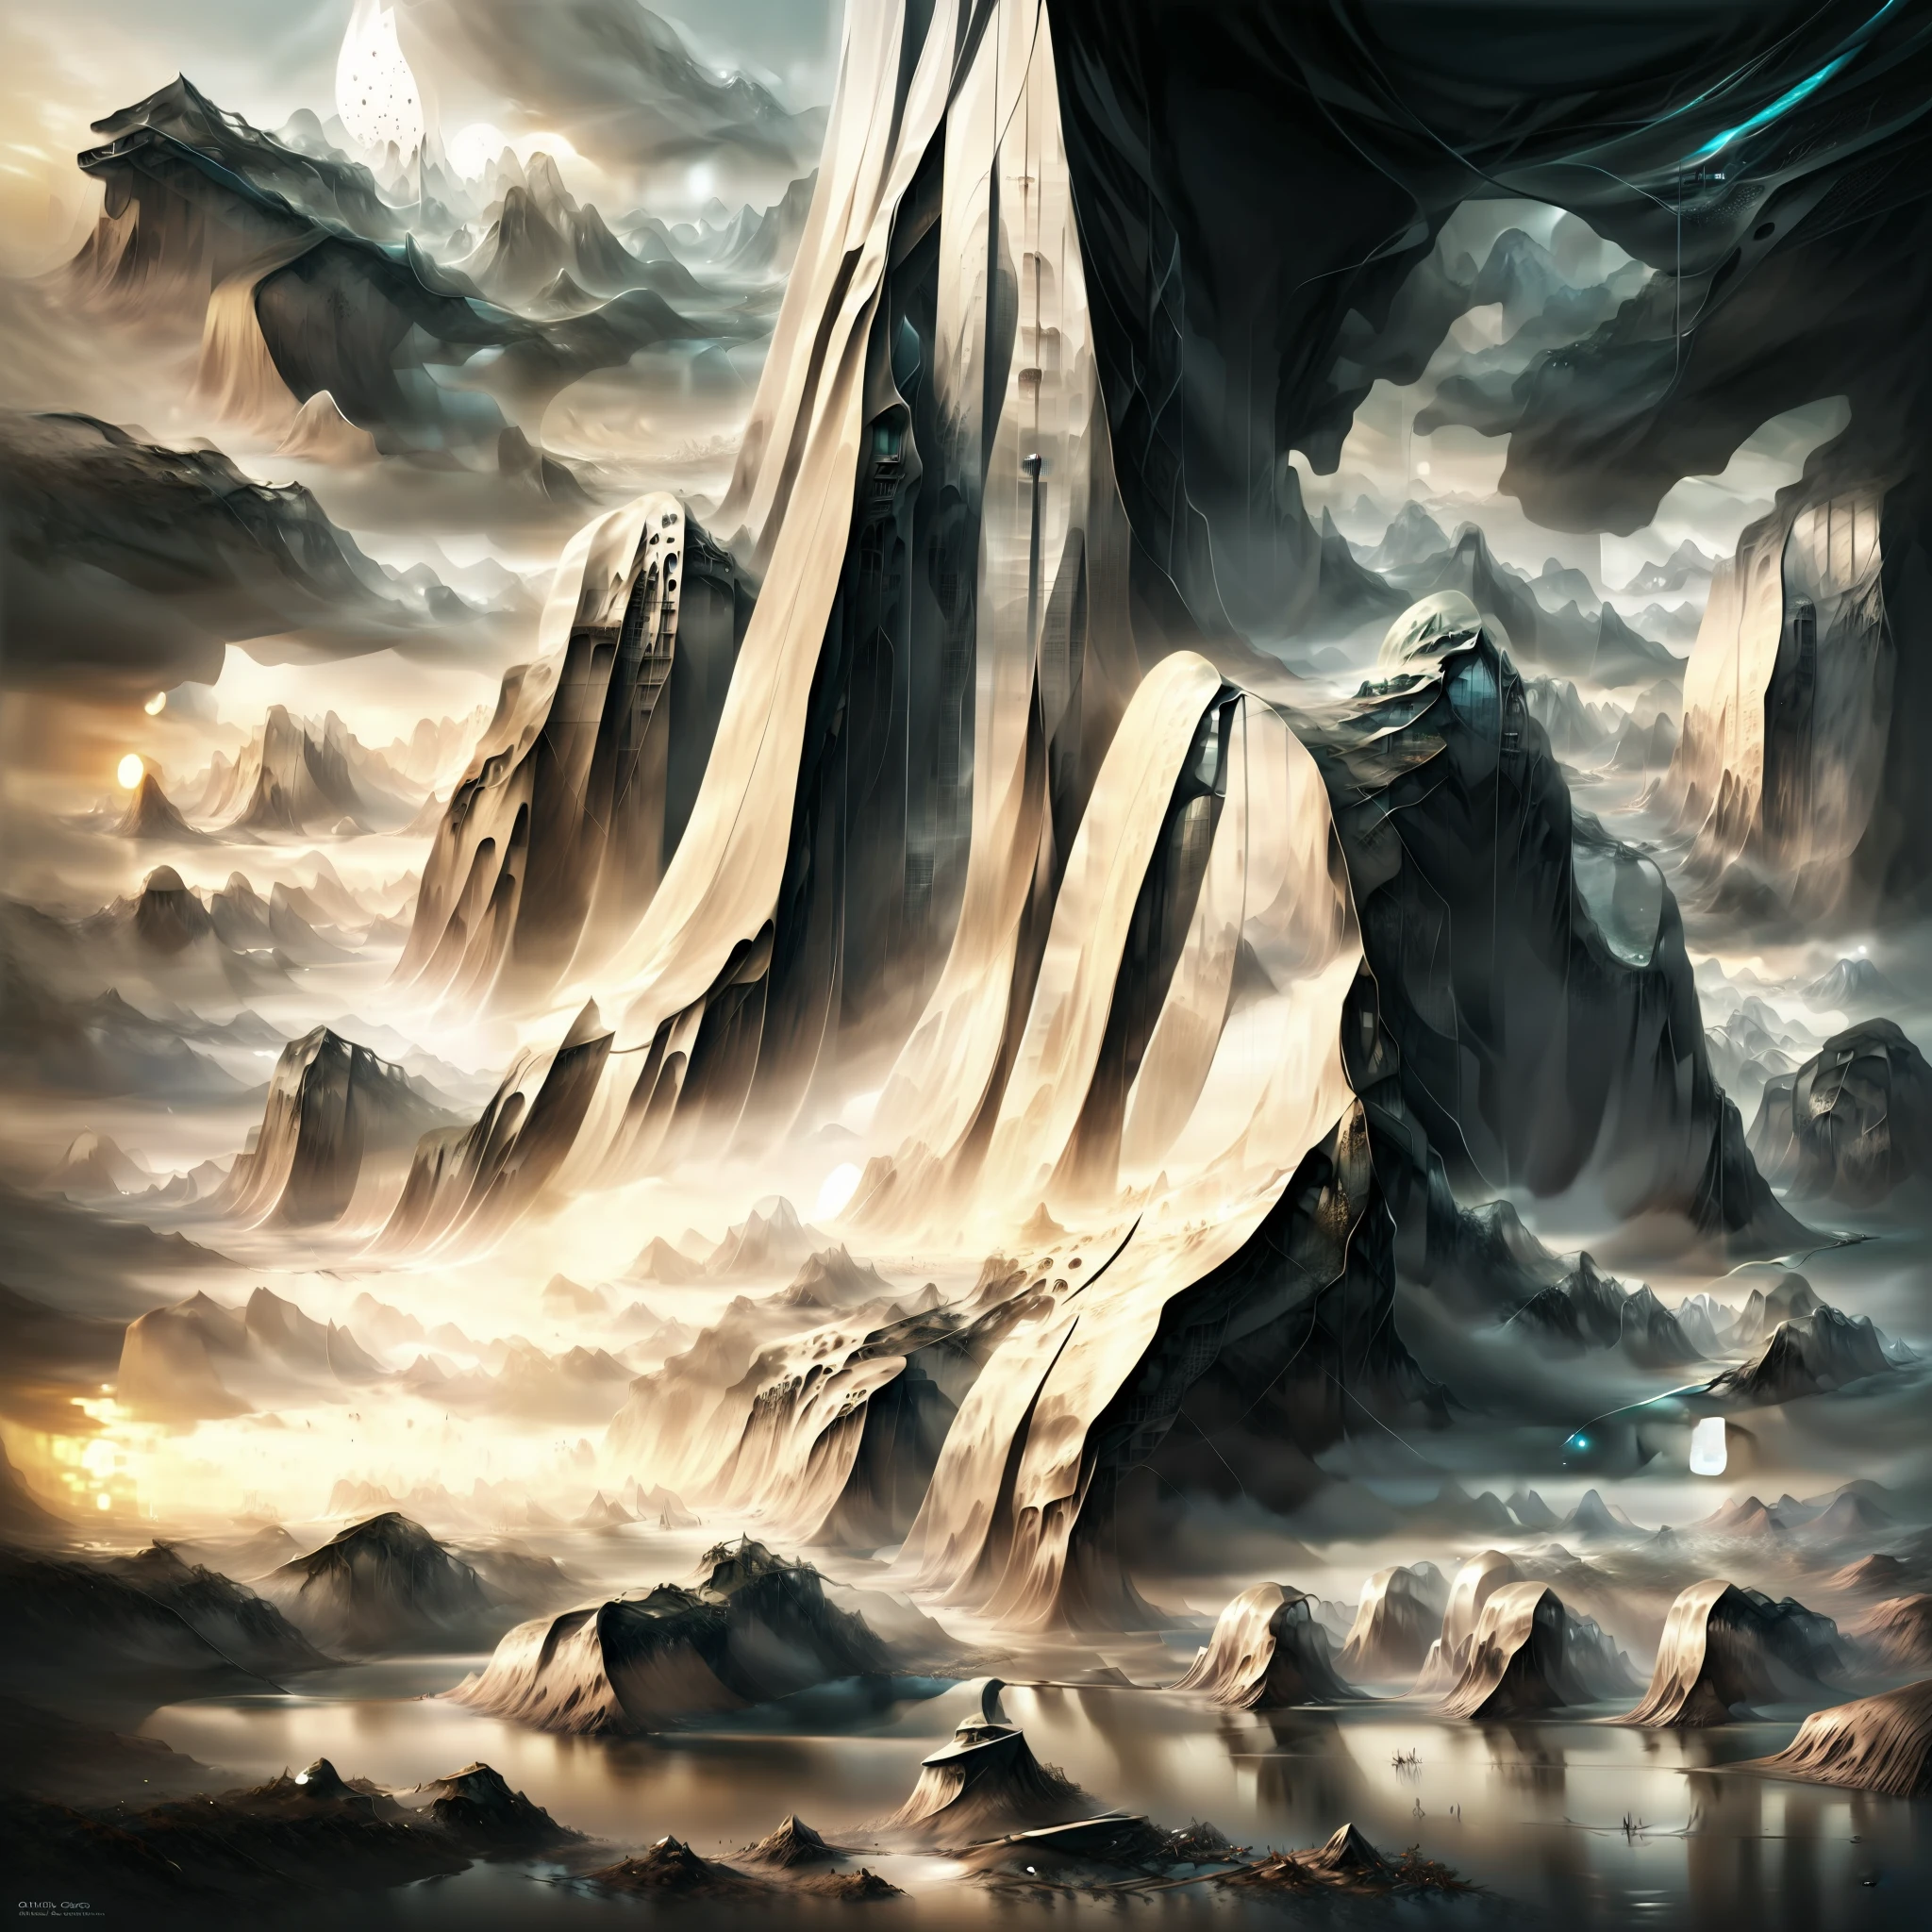 there is a digital painting of a mountain with a waterfall, symmetrical epic fantasy art, organic matte painting, most epic landscape, matte digital painting, illustration matte painting, surreal concept art, matte painting ”, matte painting”, dramatic concept art, epic fantasy digital art style, floating mountains, detailed fantasy digital art, dreamlike digital painting, fractal landscape, alien waterfall